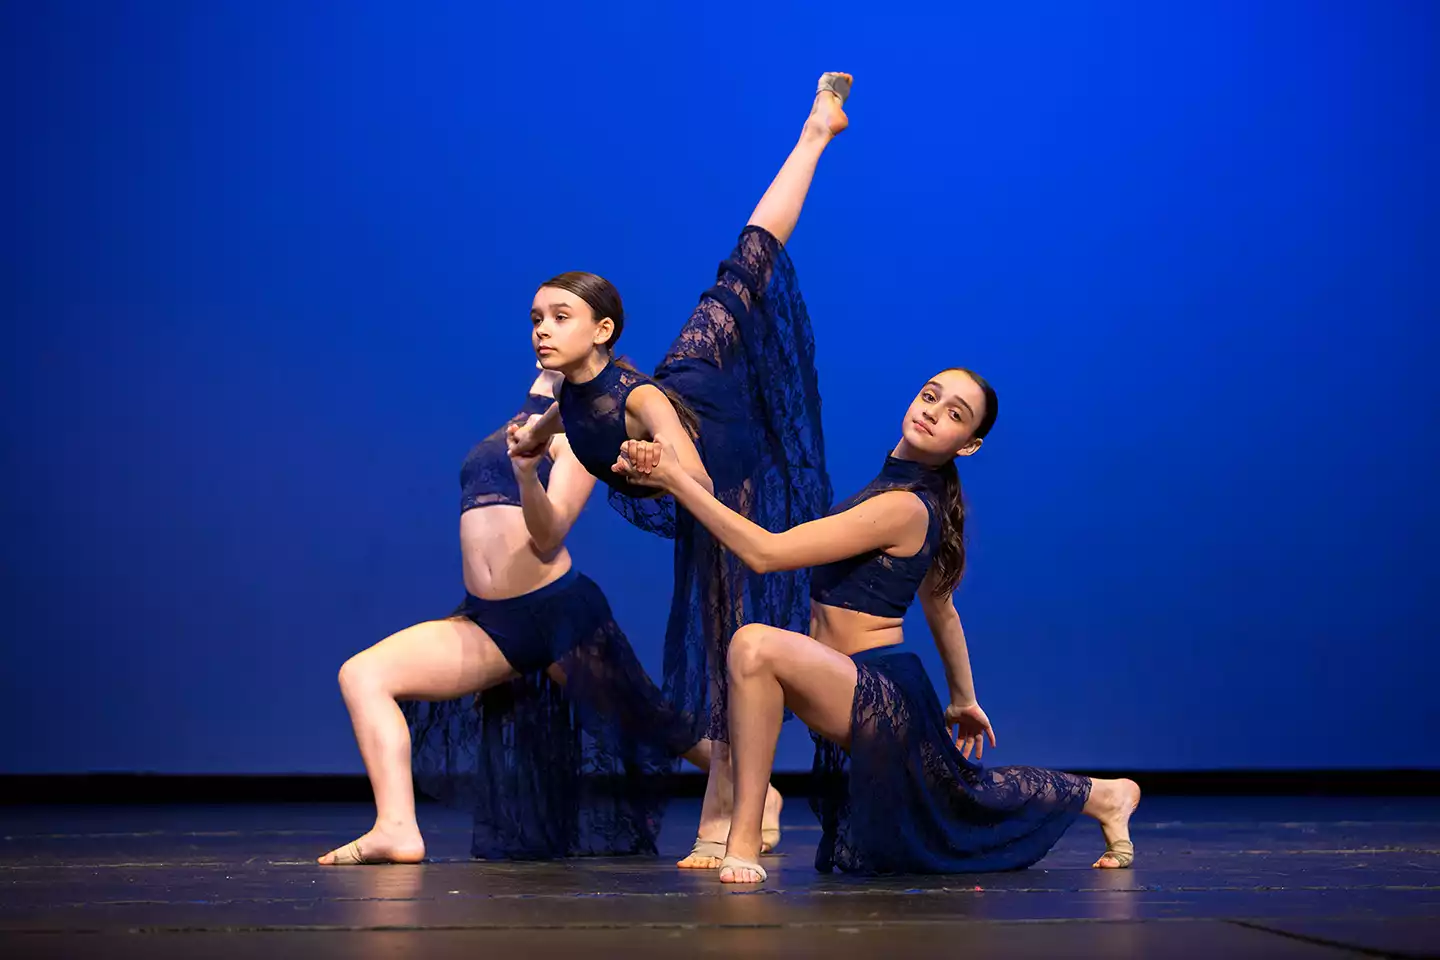 This performance was one of our first competition pieces.  These three dancers all went on to study as dance majors at LaGuardia High School, and then have pursued dance in different capacities at prestigious universities.